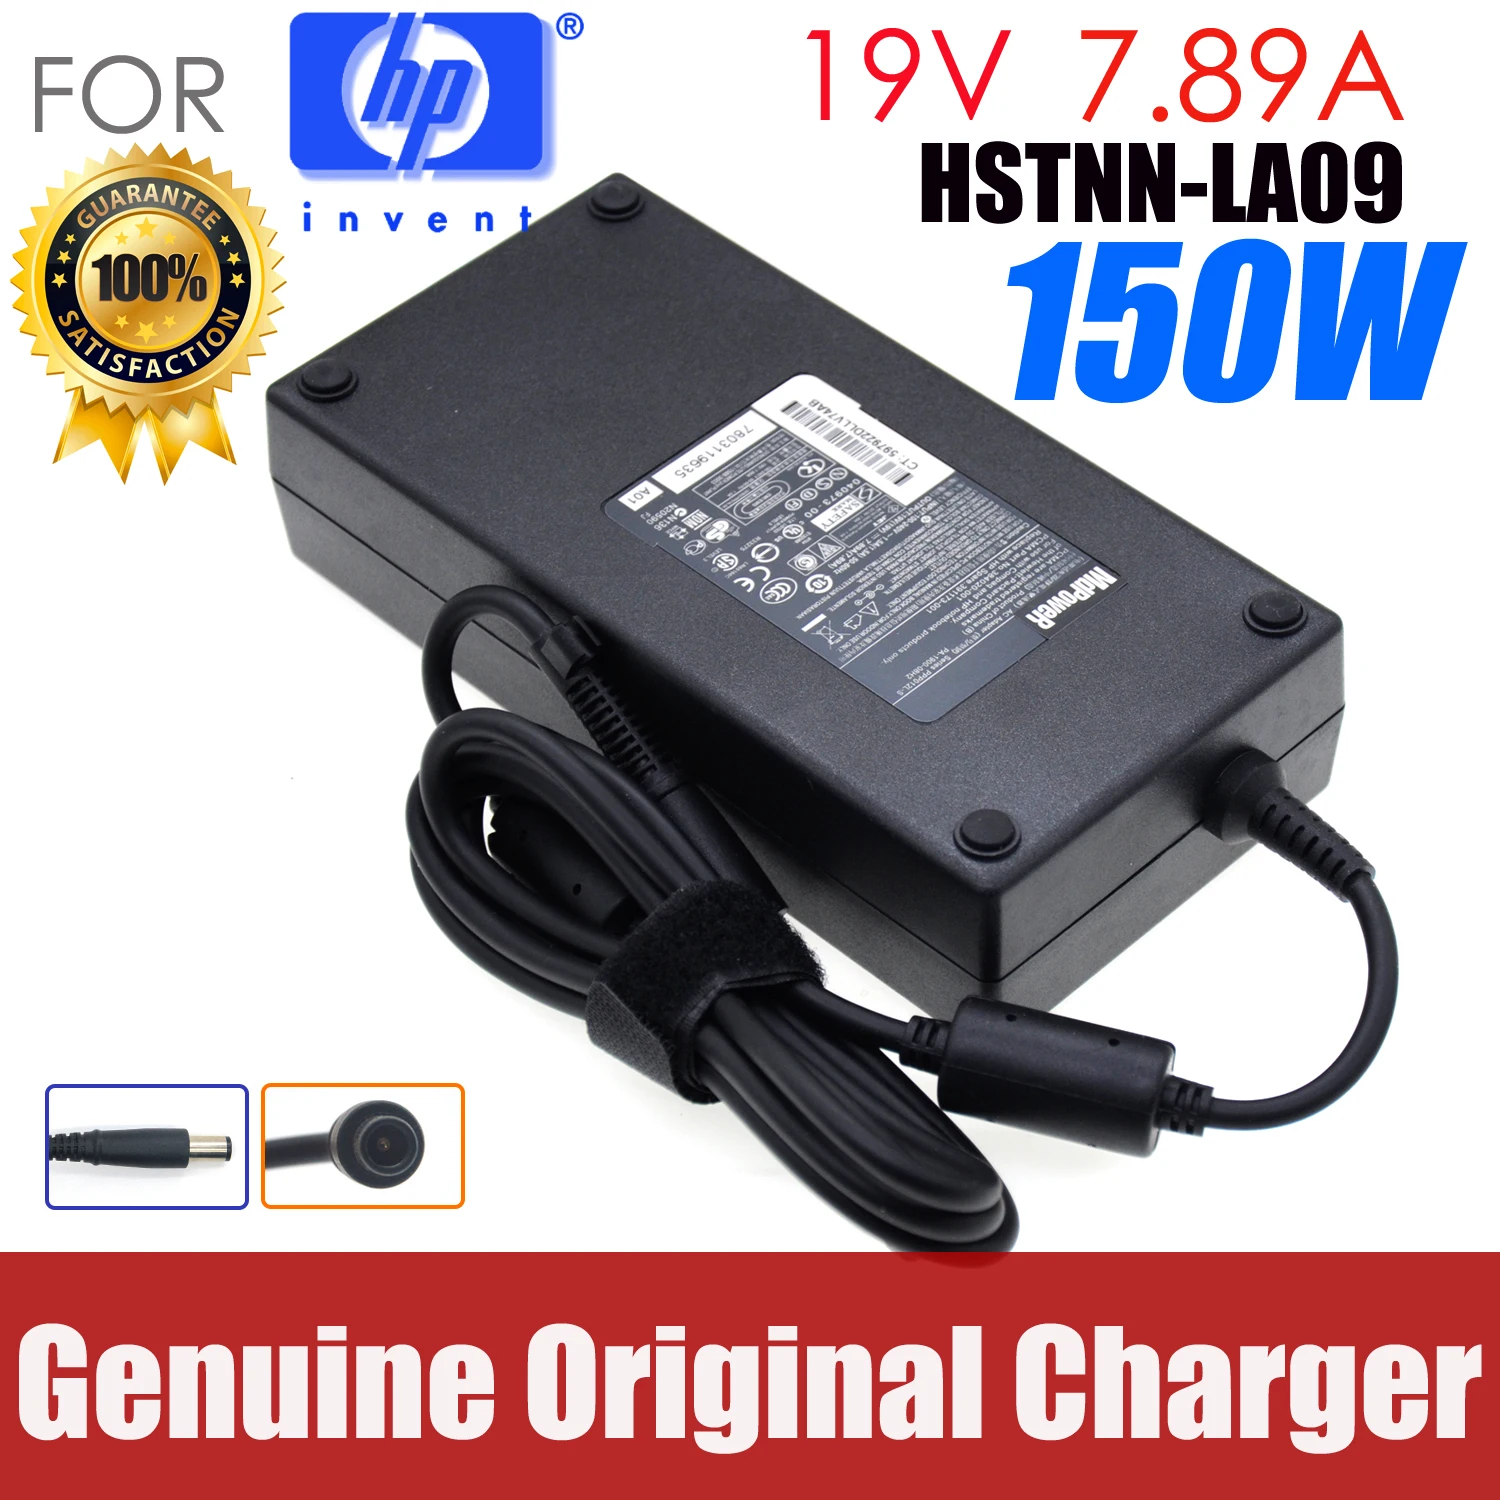 

19V 7.89A 7.9A 150W Laptop AC Adapter Charger for HP ELITEBOOK 8530P 8530W 8730W HSTNN-HA09 LA09 PA-1151-03HS 609919-001